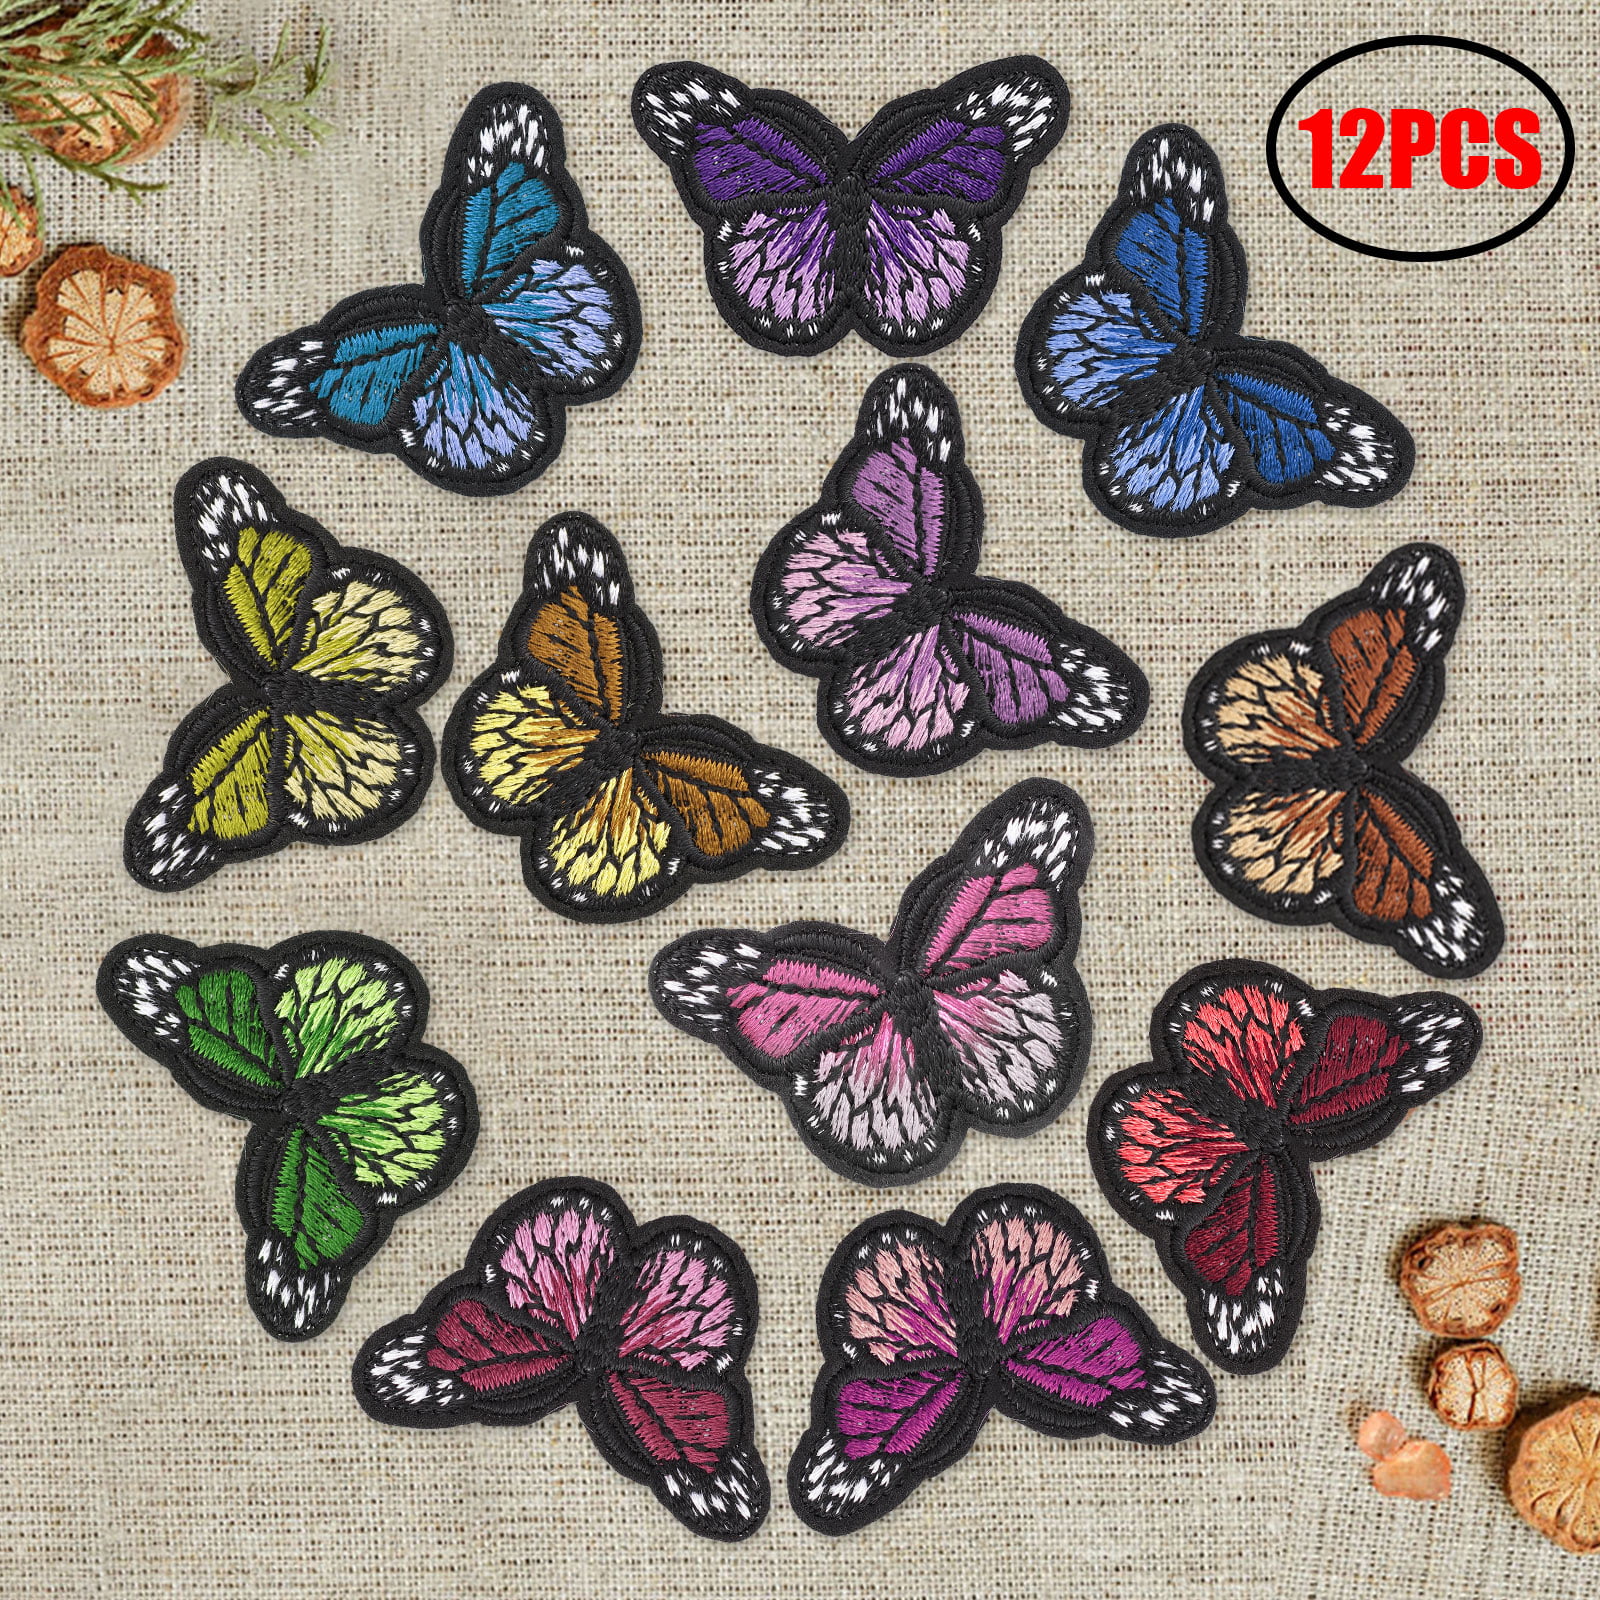 ID 2160AB Set of 2 Spring Butterfly Patches Insect Embroidered Iron On Applique